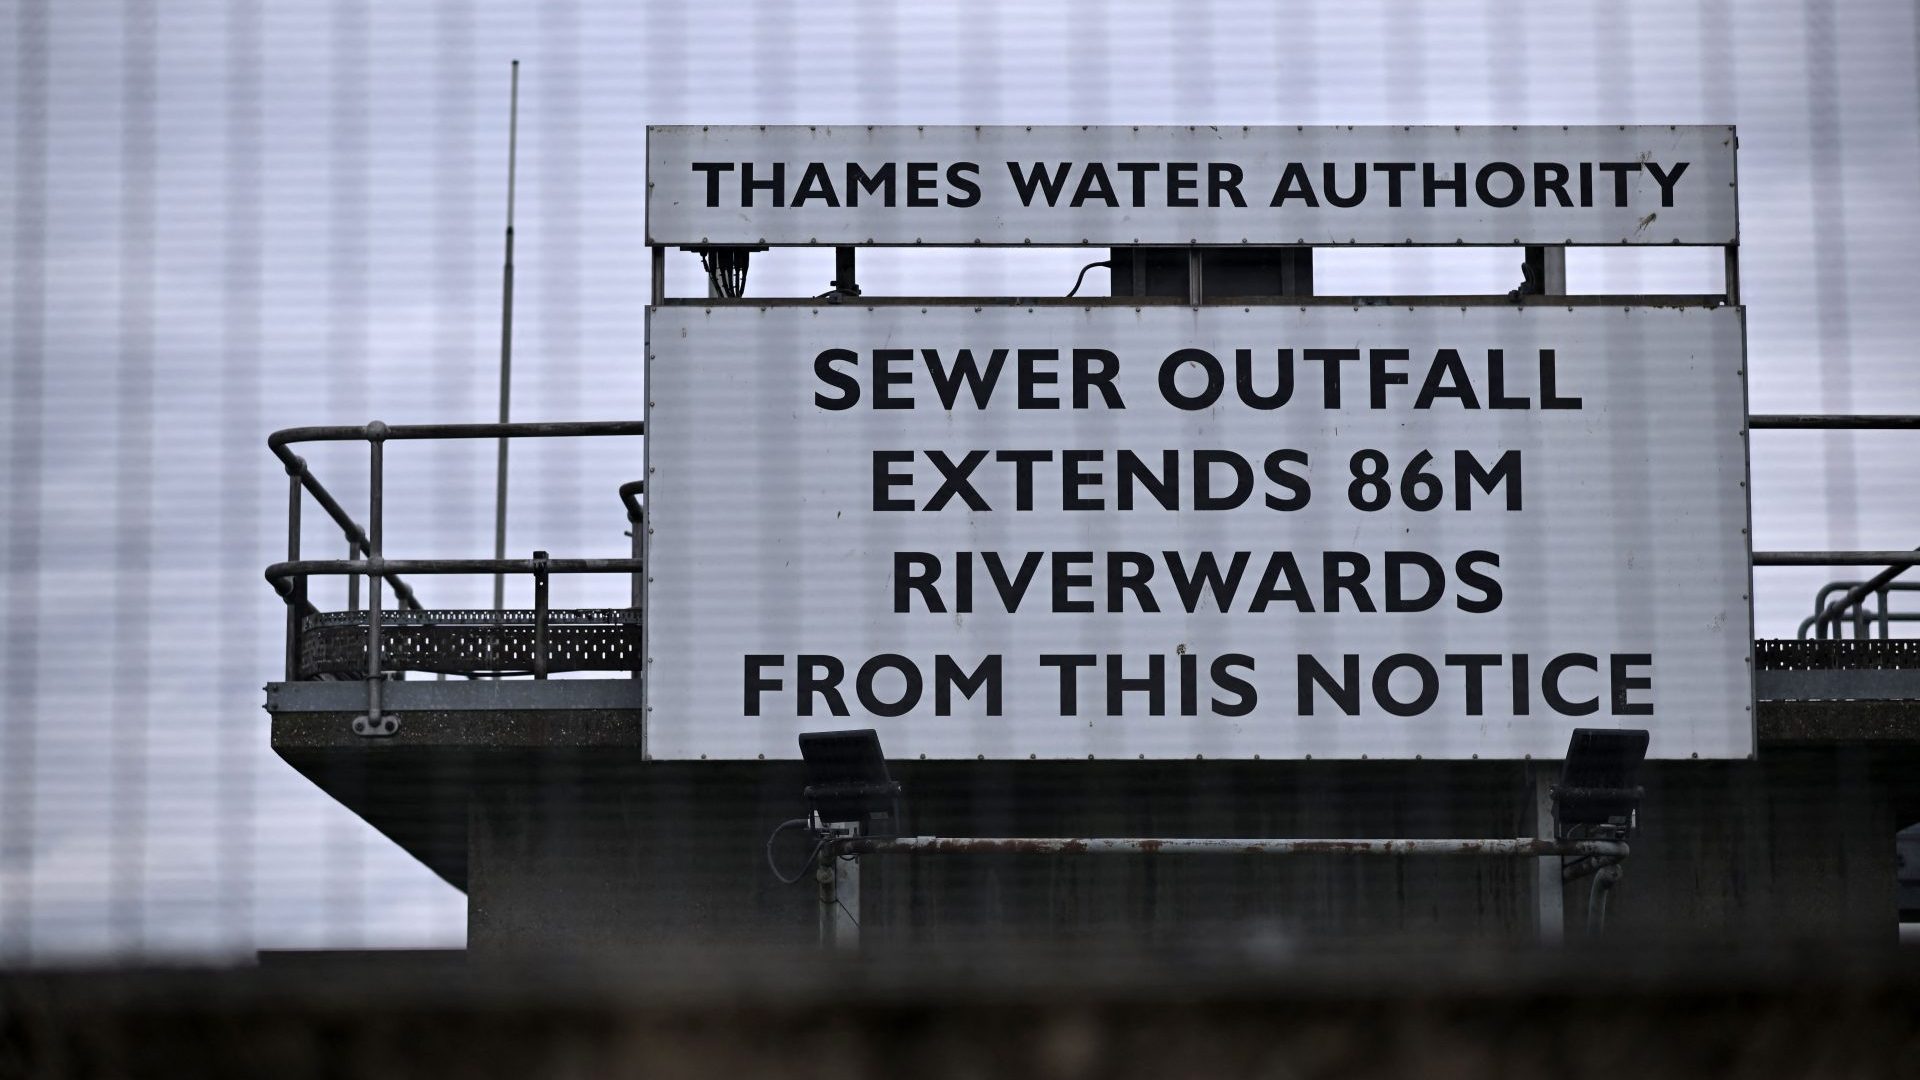 A sign warning of a 'Sewage Outfall' is pictured at the Thames Water Long Reach water treatment facility on the banks of the Thames estuary in Dartford (Photo by BEN STANSALL/AFP via Getty Images)